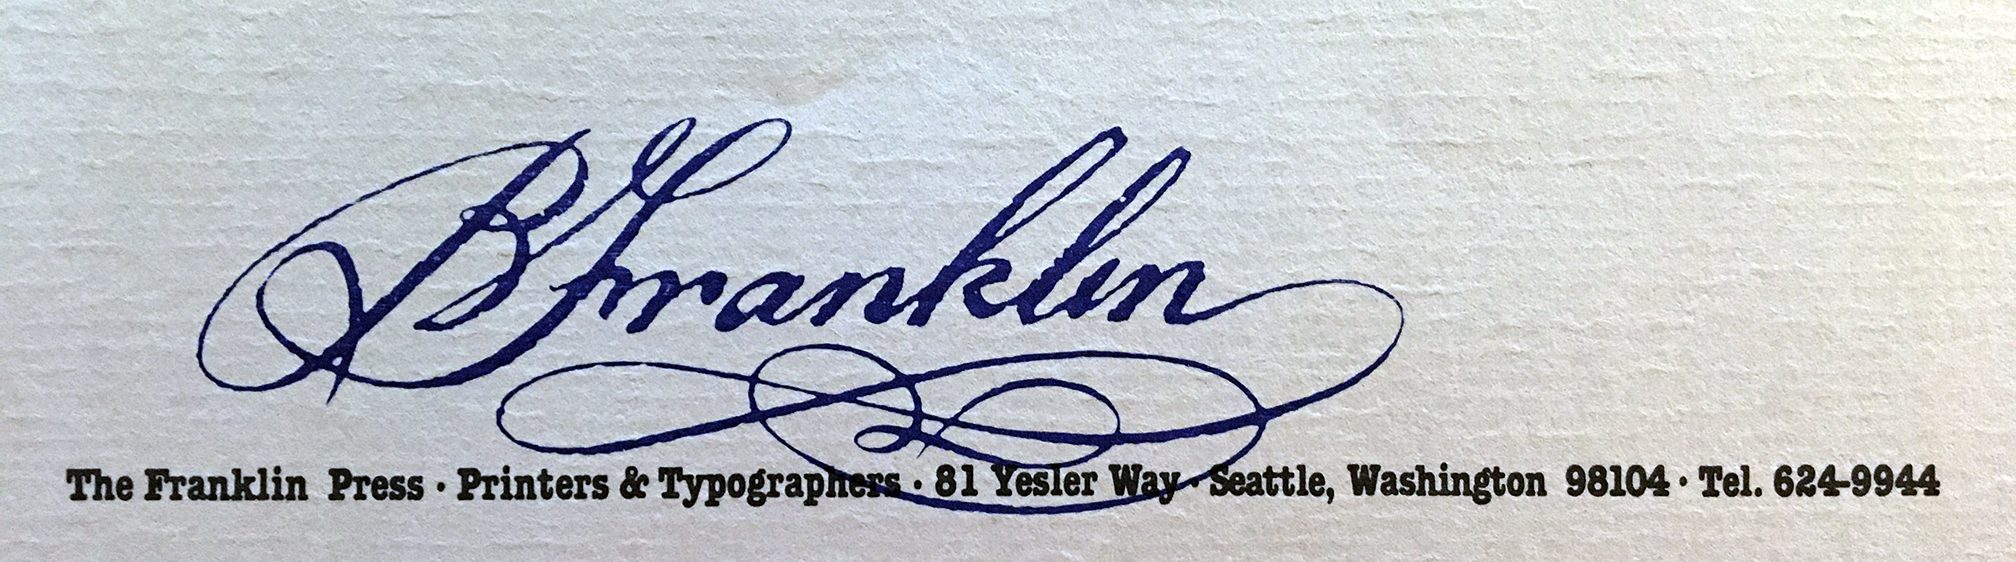 Letterhead of Franklin Press, with reproduction of Ben Franklin's signature